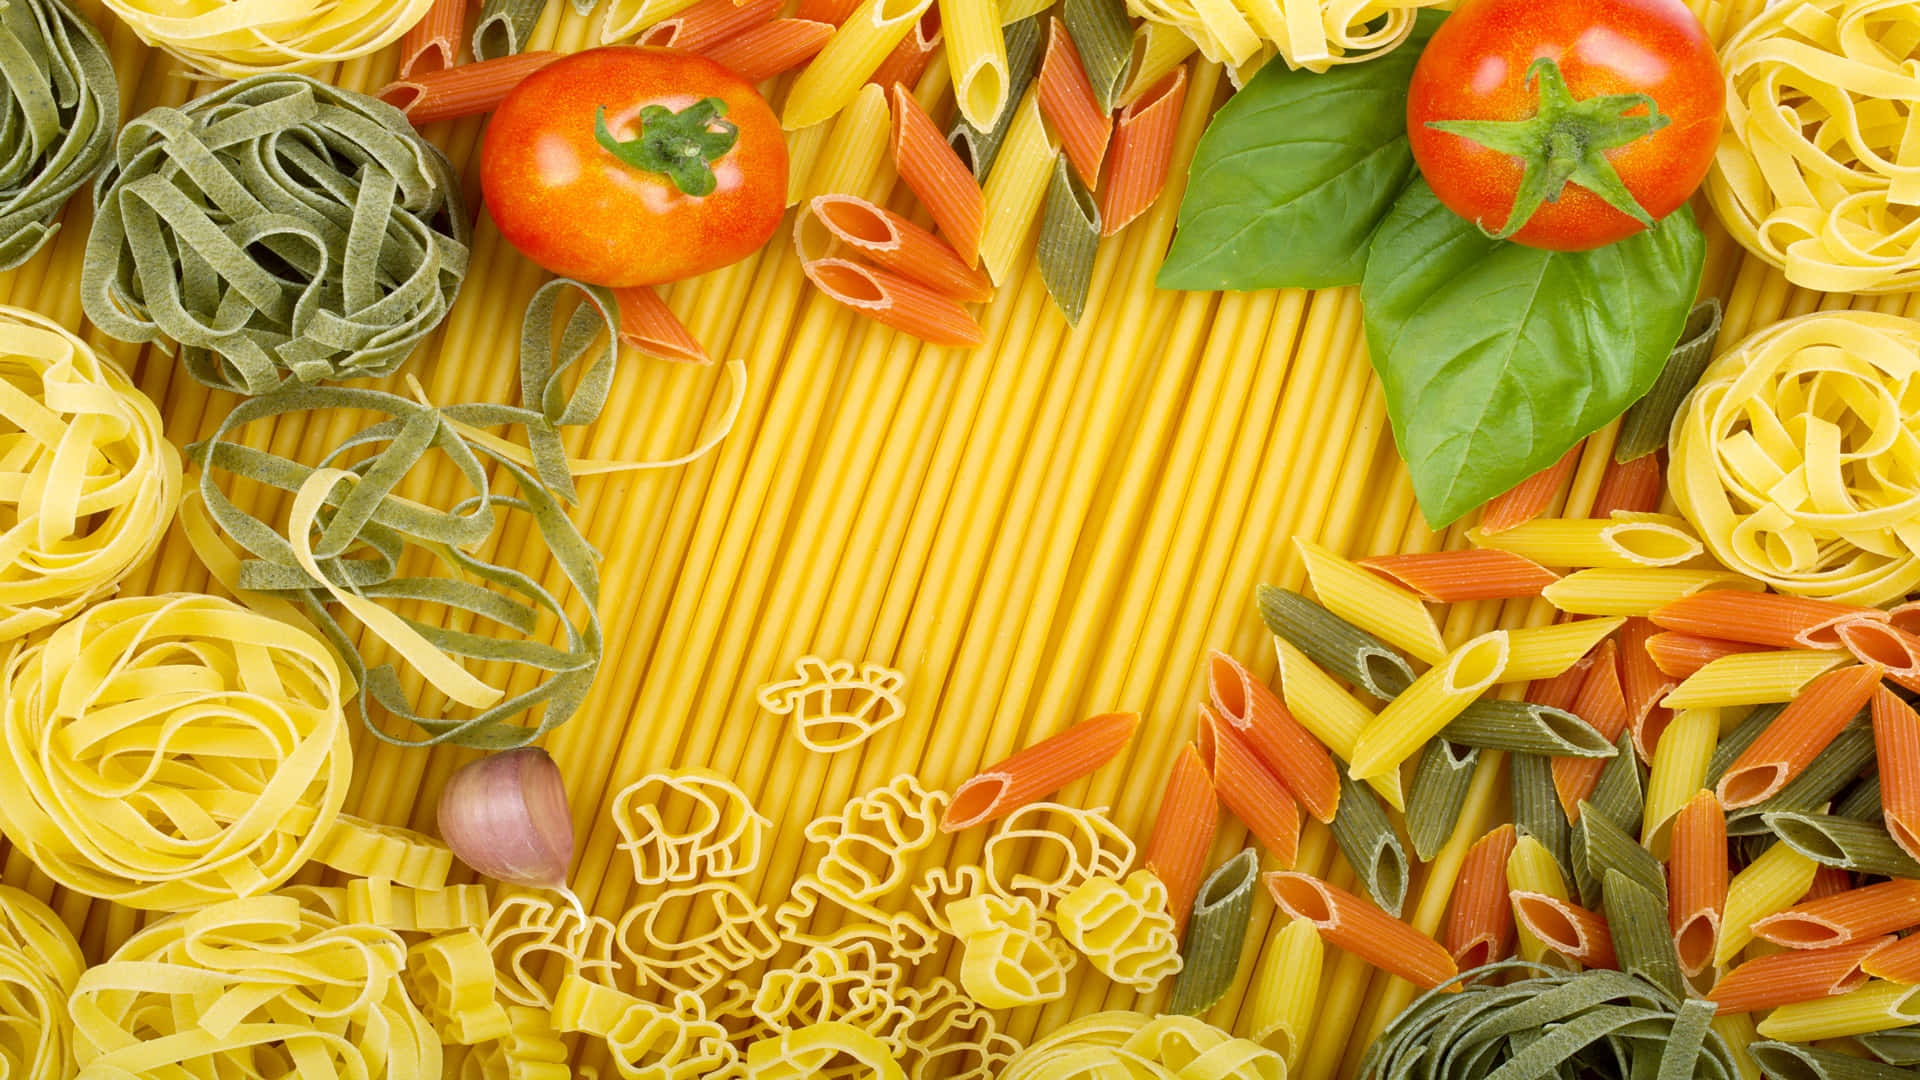 Organized With Different Varieties 1920x1080 Pasta Background